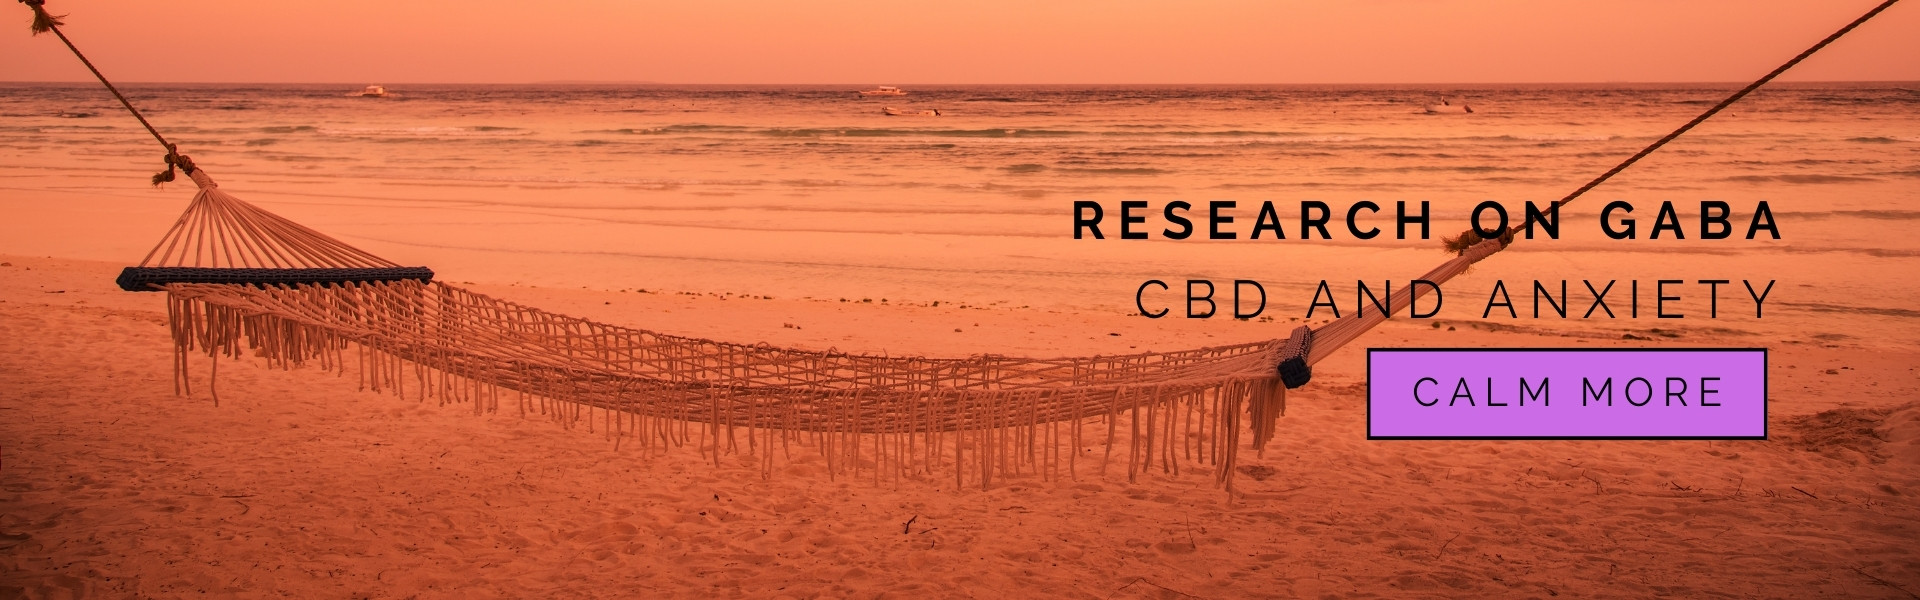 CBD, a natural compound found in cannabis plants, has gained significant attention for its potential in managing anxiety. This interest is grounded in extensive research, including studies from the National Institutes of Health (NIH). CBD's efficacy in treating anxiety is believed to be linked to its interaction with the body's endocannabinoid system, which plays a crucial role in regulating mood and stress responses. NIH research indicates that CBD can alter serotonin signals, a key neurotransmitter involved in mental health. Low serotonin levels are commonly associated with anxiety disorders, and CBD's impact on these signals is a promising avenue for therapy. Additionally, NIH studies highlight CBD's potential in reducing anxiety without the psychoactive effects associated with THC, another compound in cannabis. This makes CBD an appealing option for individuals seeking natural anxiety remedies without mind-altering effects. As interest in CBD for anxiety grows, it's important to rely on credible sources like NIH research to understand its mechanisms and benefits fully. While more studies are needed, current NIH findings suggest CBD's significant potential in anxiety management, offering a natural, alternative approach to mental health care